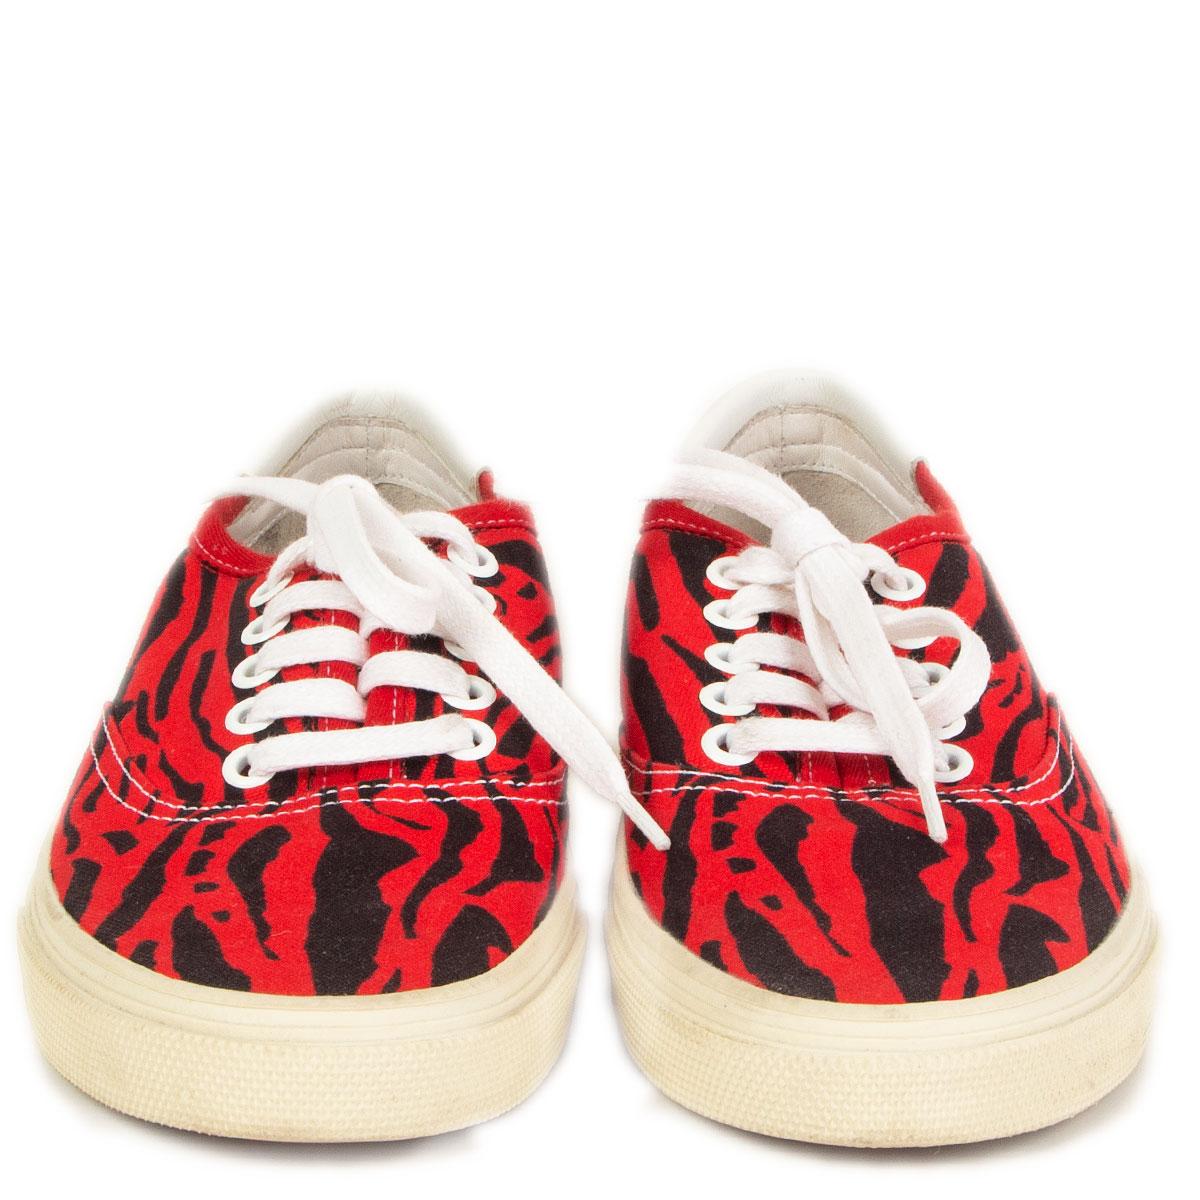 100% authentic Saint Laurent Skate low-top sneakers in red and black zebra printed canvas and white leather lining. Featuring an off-white rubber sole. Have been worn and are in excellent condition.  

Measurements
Imprinted Size	37
Shoe